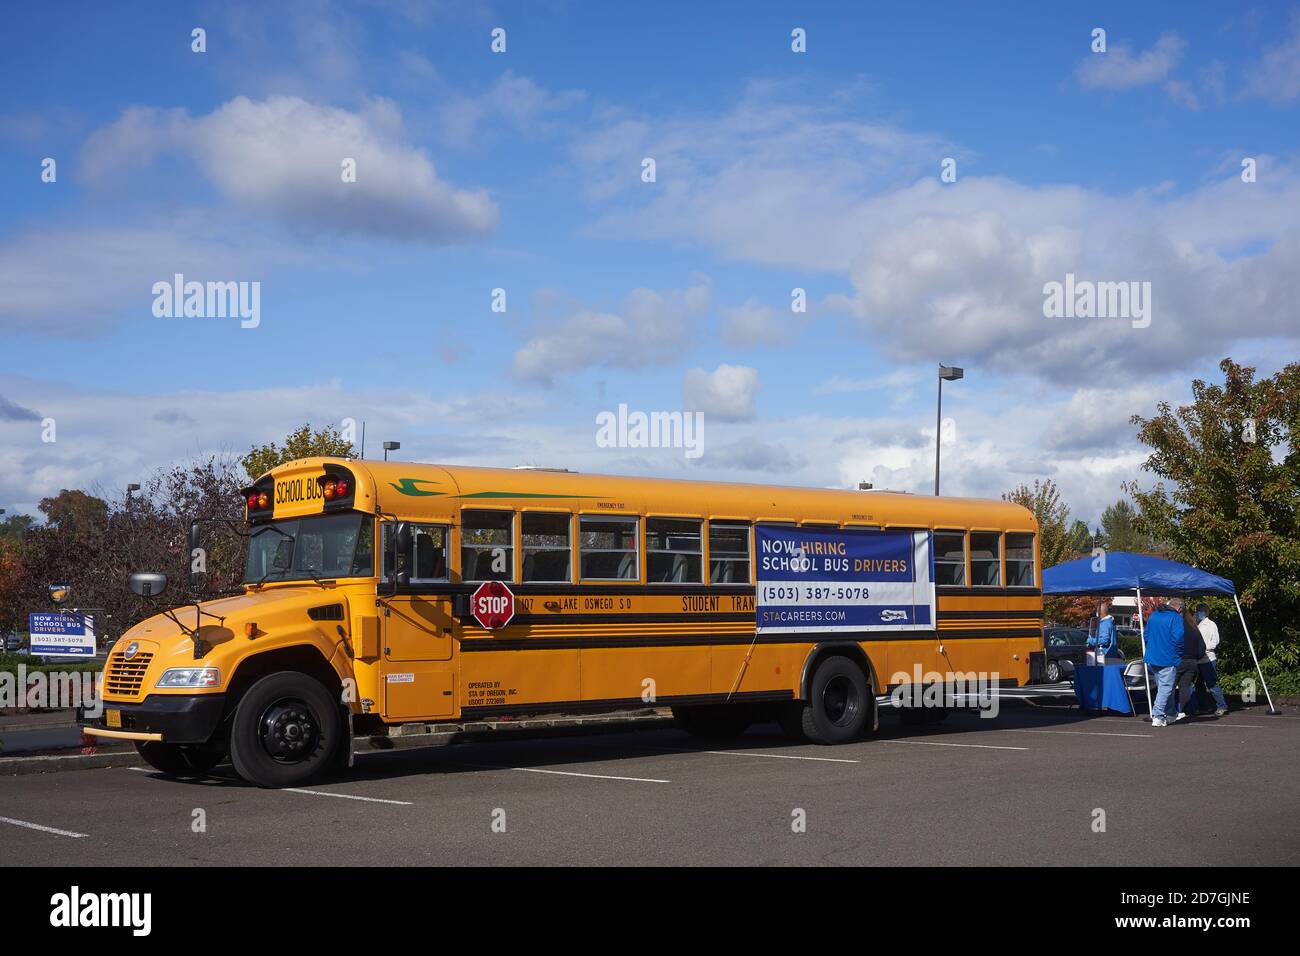 A school bus driver recruitment booth is seen in a parking lot in Tigard, Oregon, on Wednesday, October 21, 2020, amid the coronavirus pandemic. Stock Photo